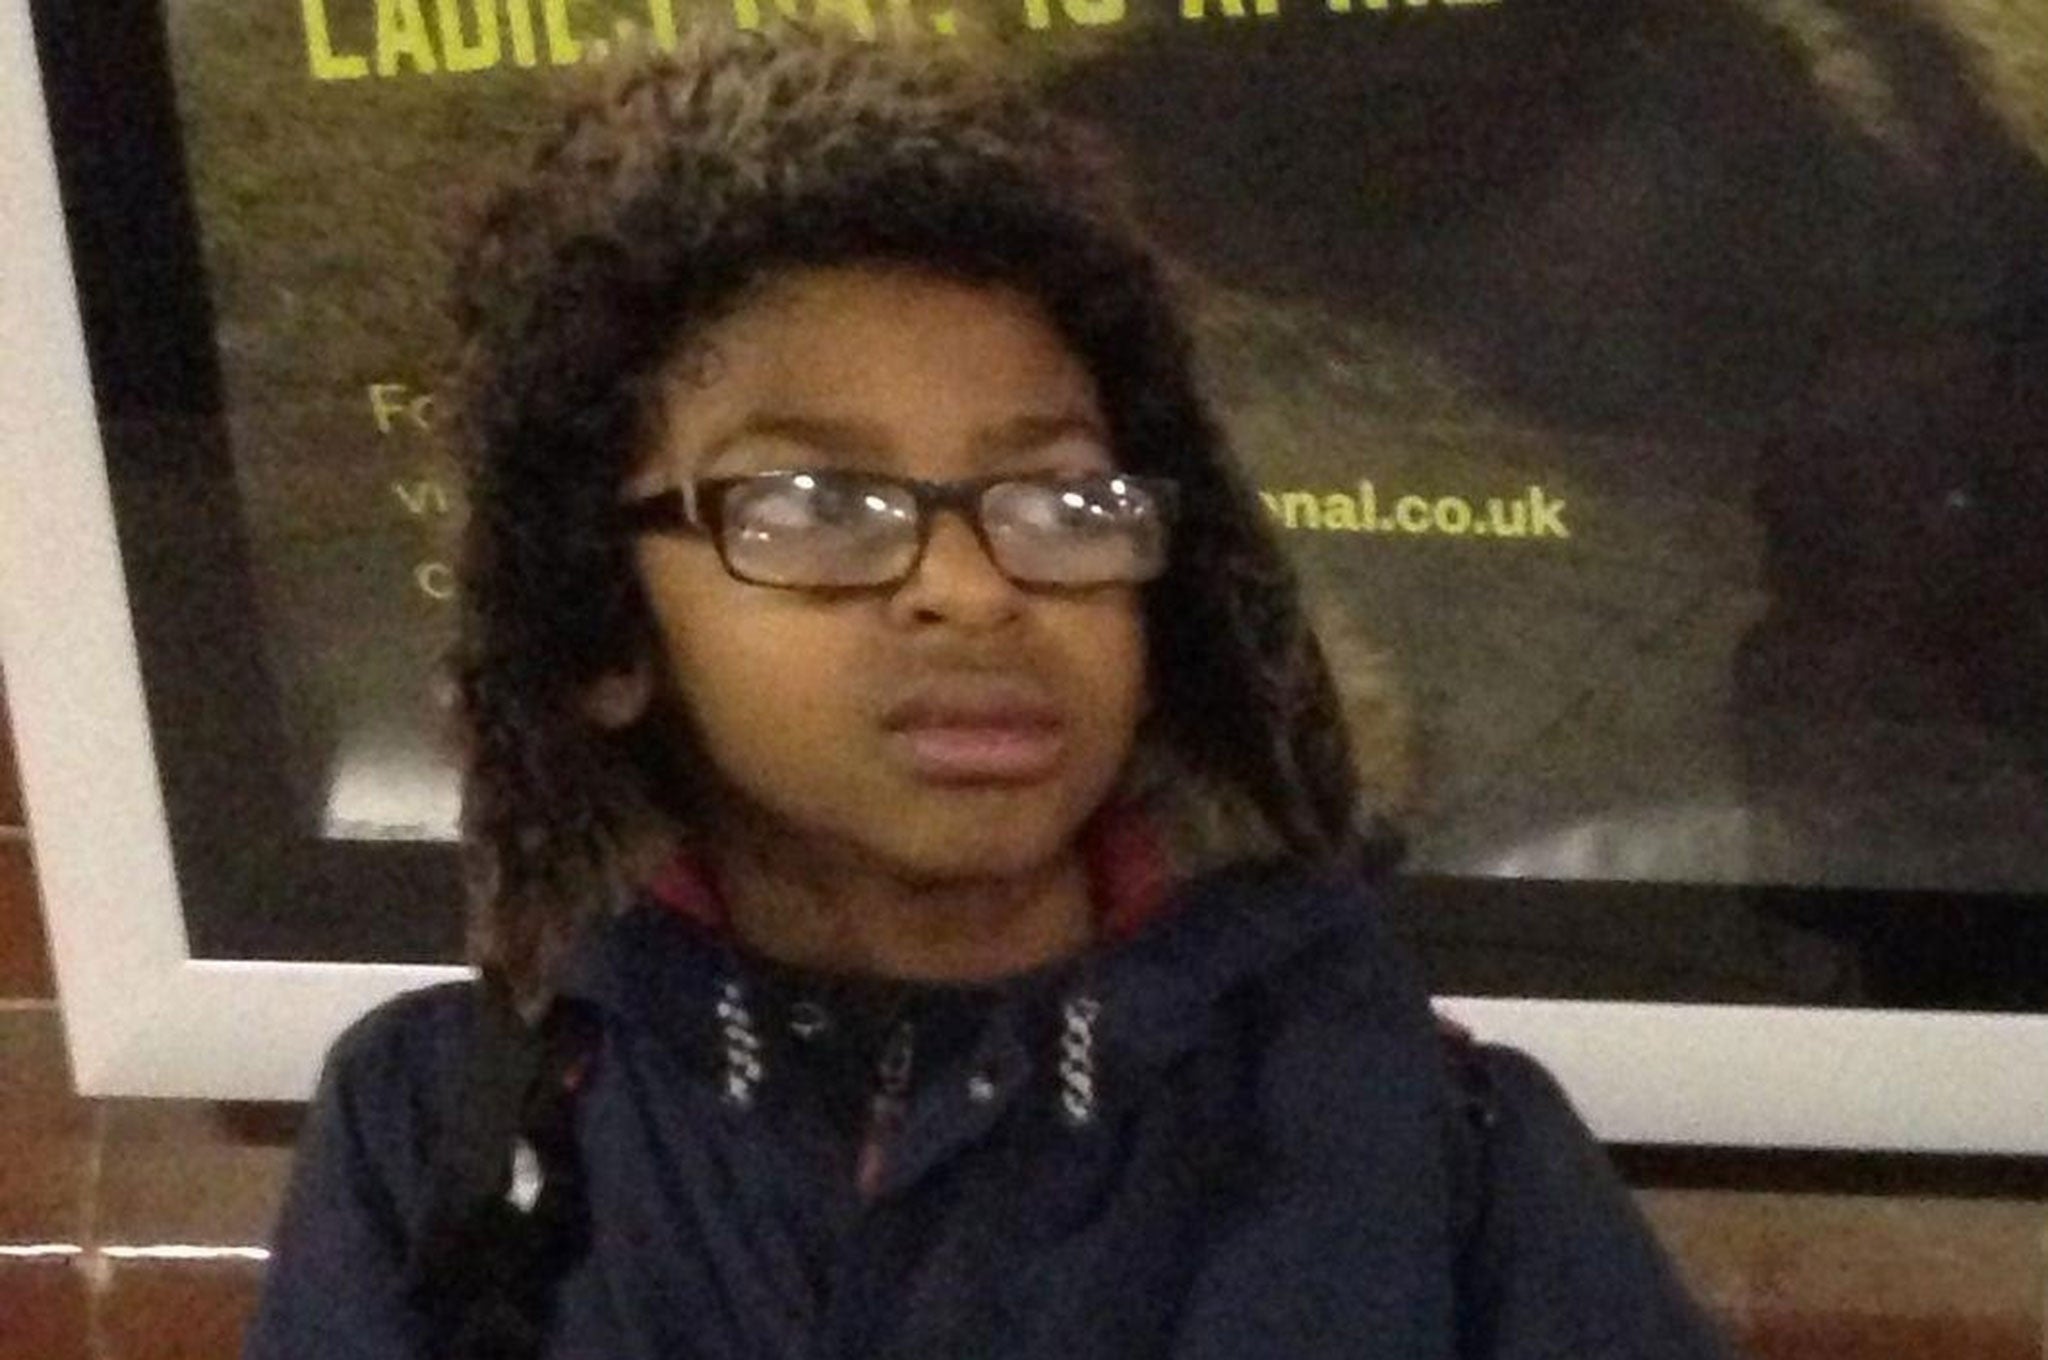 Malakhi Chijiutomi-Ghosh, a 10-year-old boy missing from his home in south London